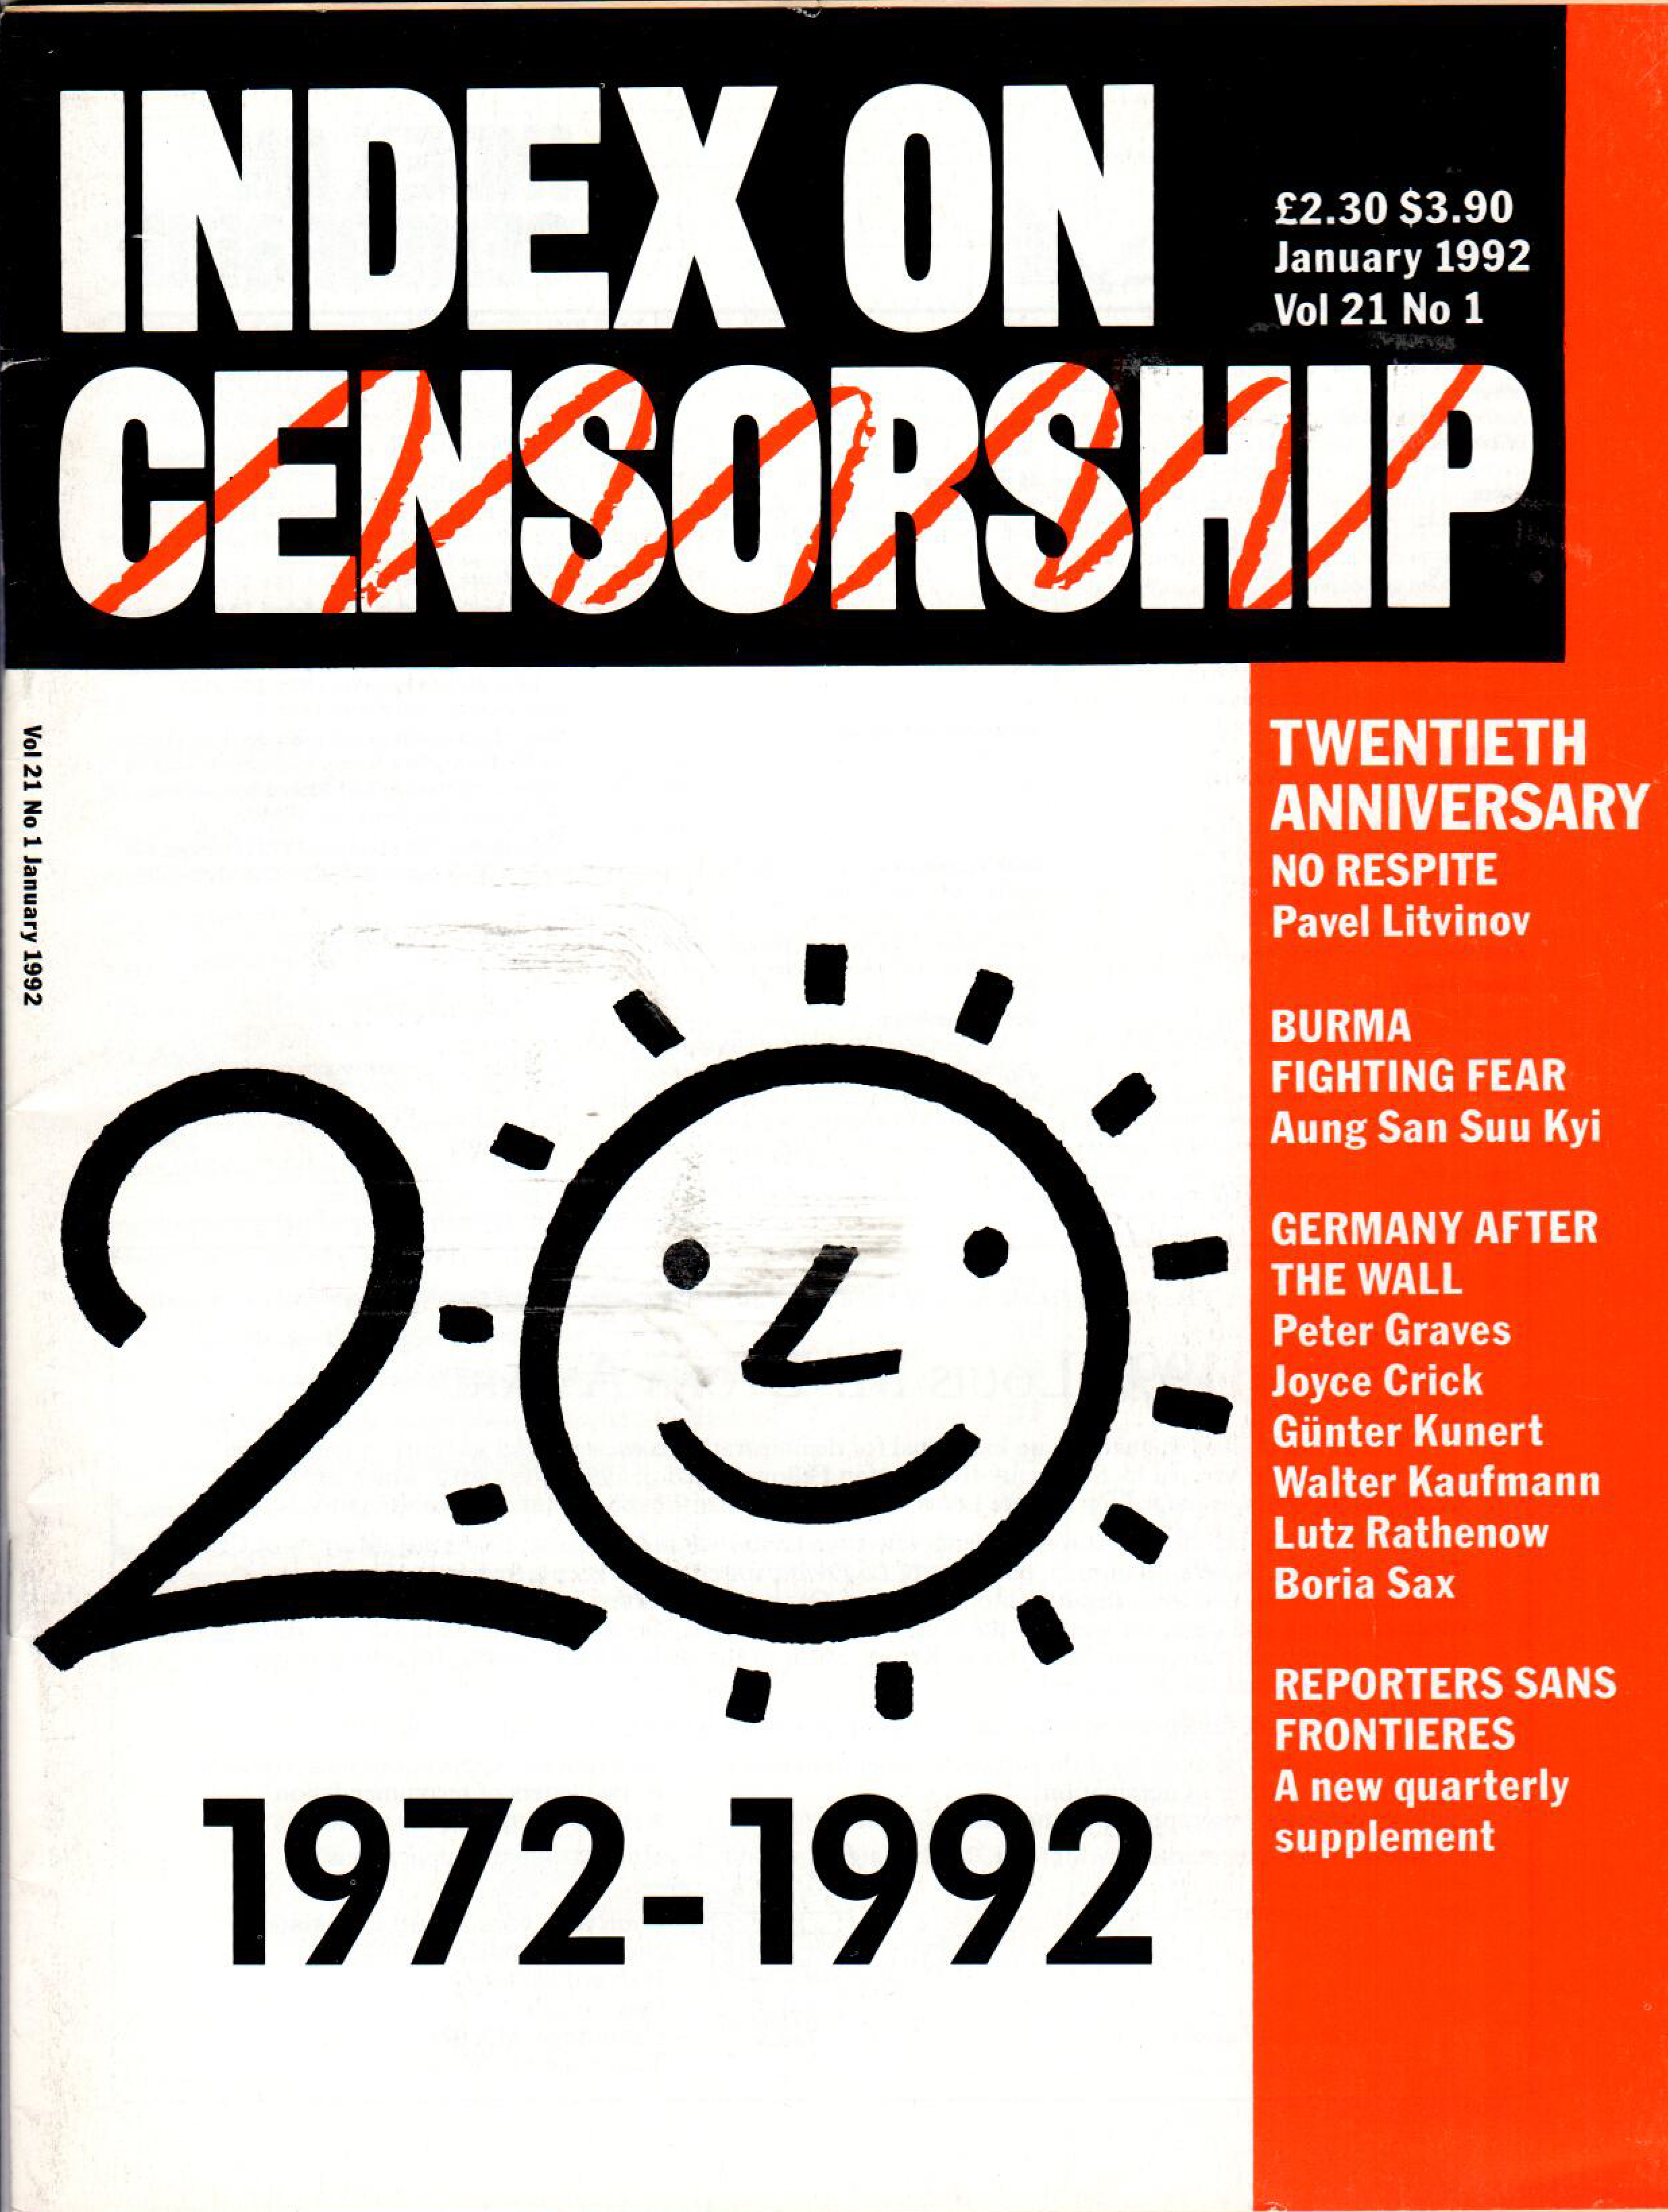 20th Anniversary: : Waiting for the new dictators, the January 1992 issue of the Index on Censorship magazine.